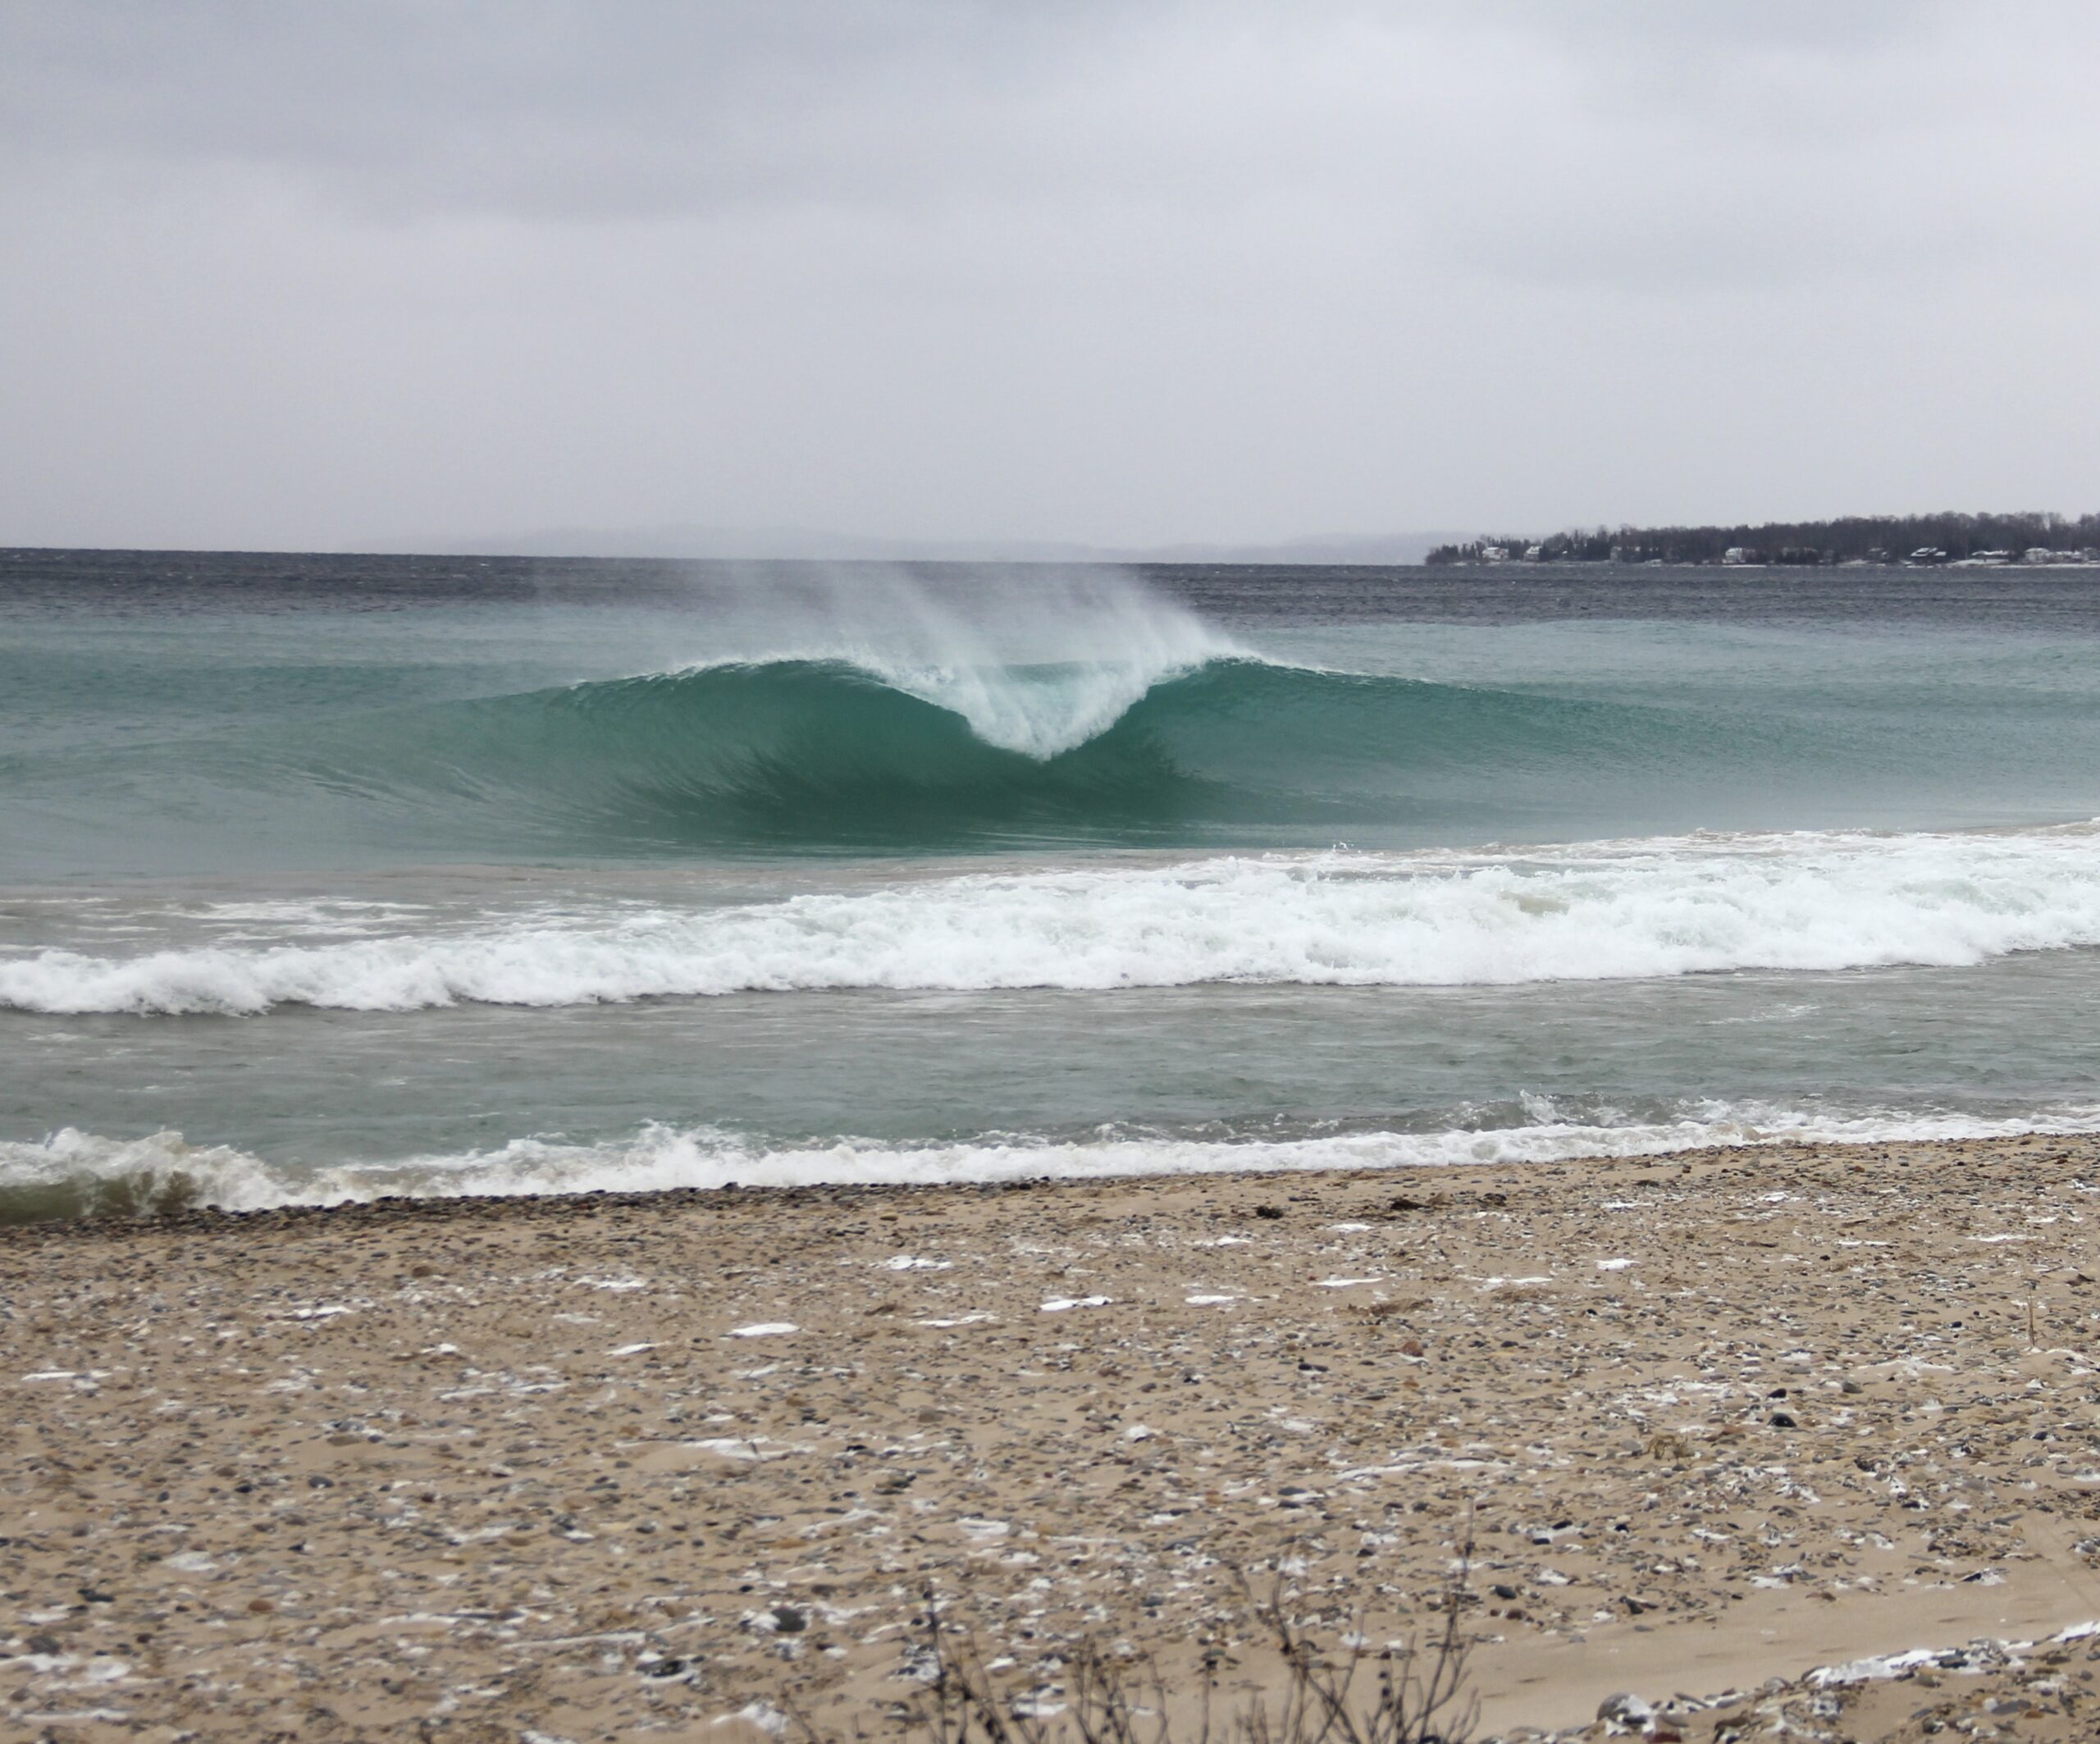 Full Frame: How The Recent Atlantic Wind-Blast Created Waves Like This In A Lake